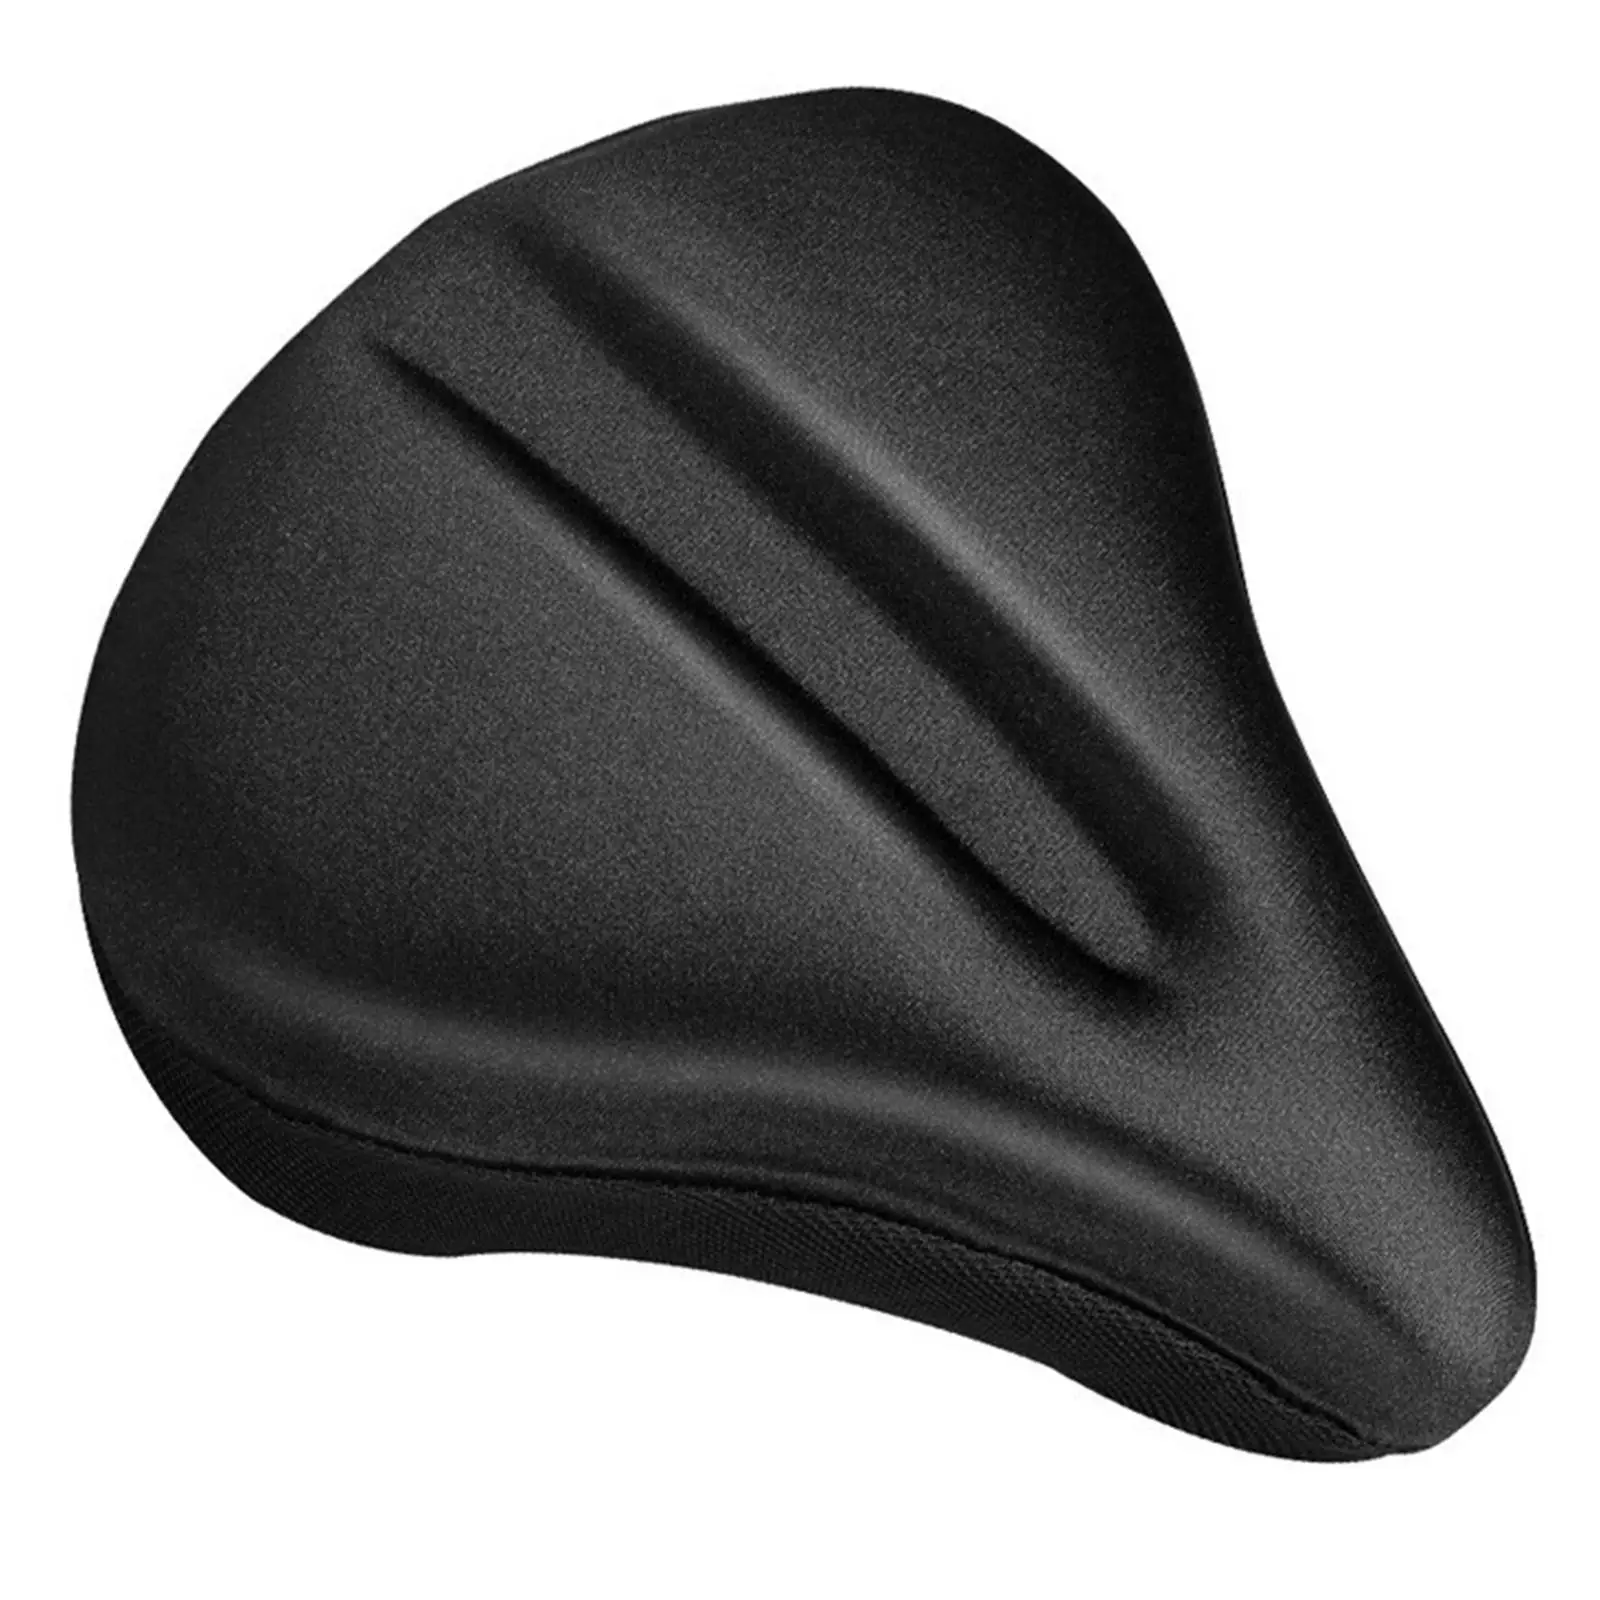 Bicycle Seat Cover Thick Sponge Shockproof Bicycle Cushion Pad for Road Bike Riding Folding Bicycle Outdoor Cycling Women Men